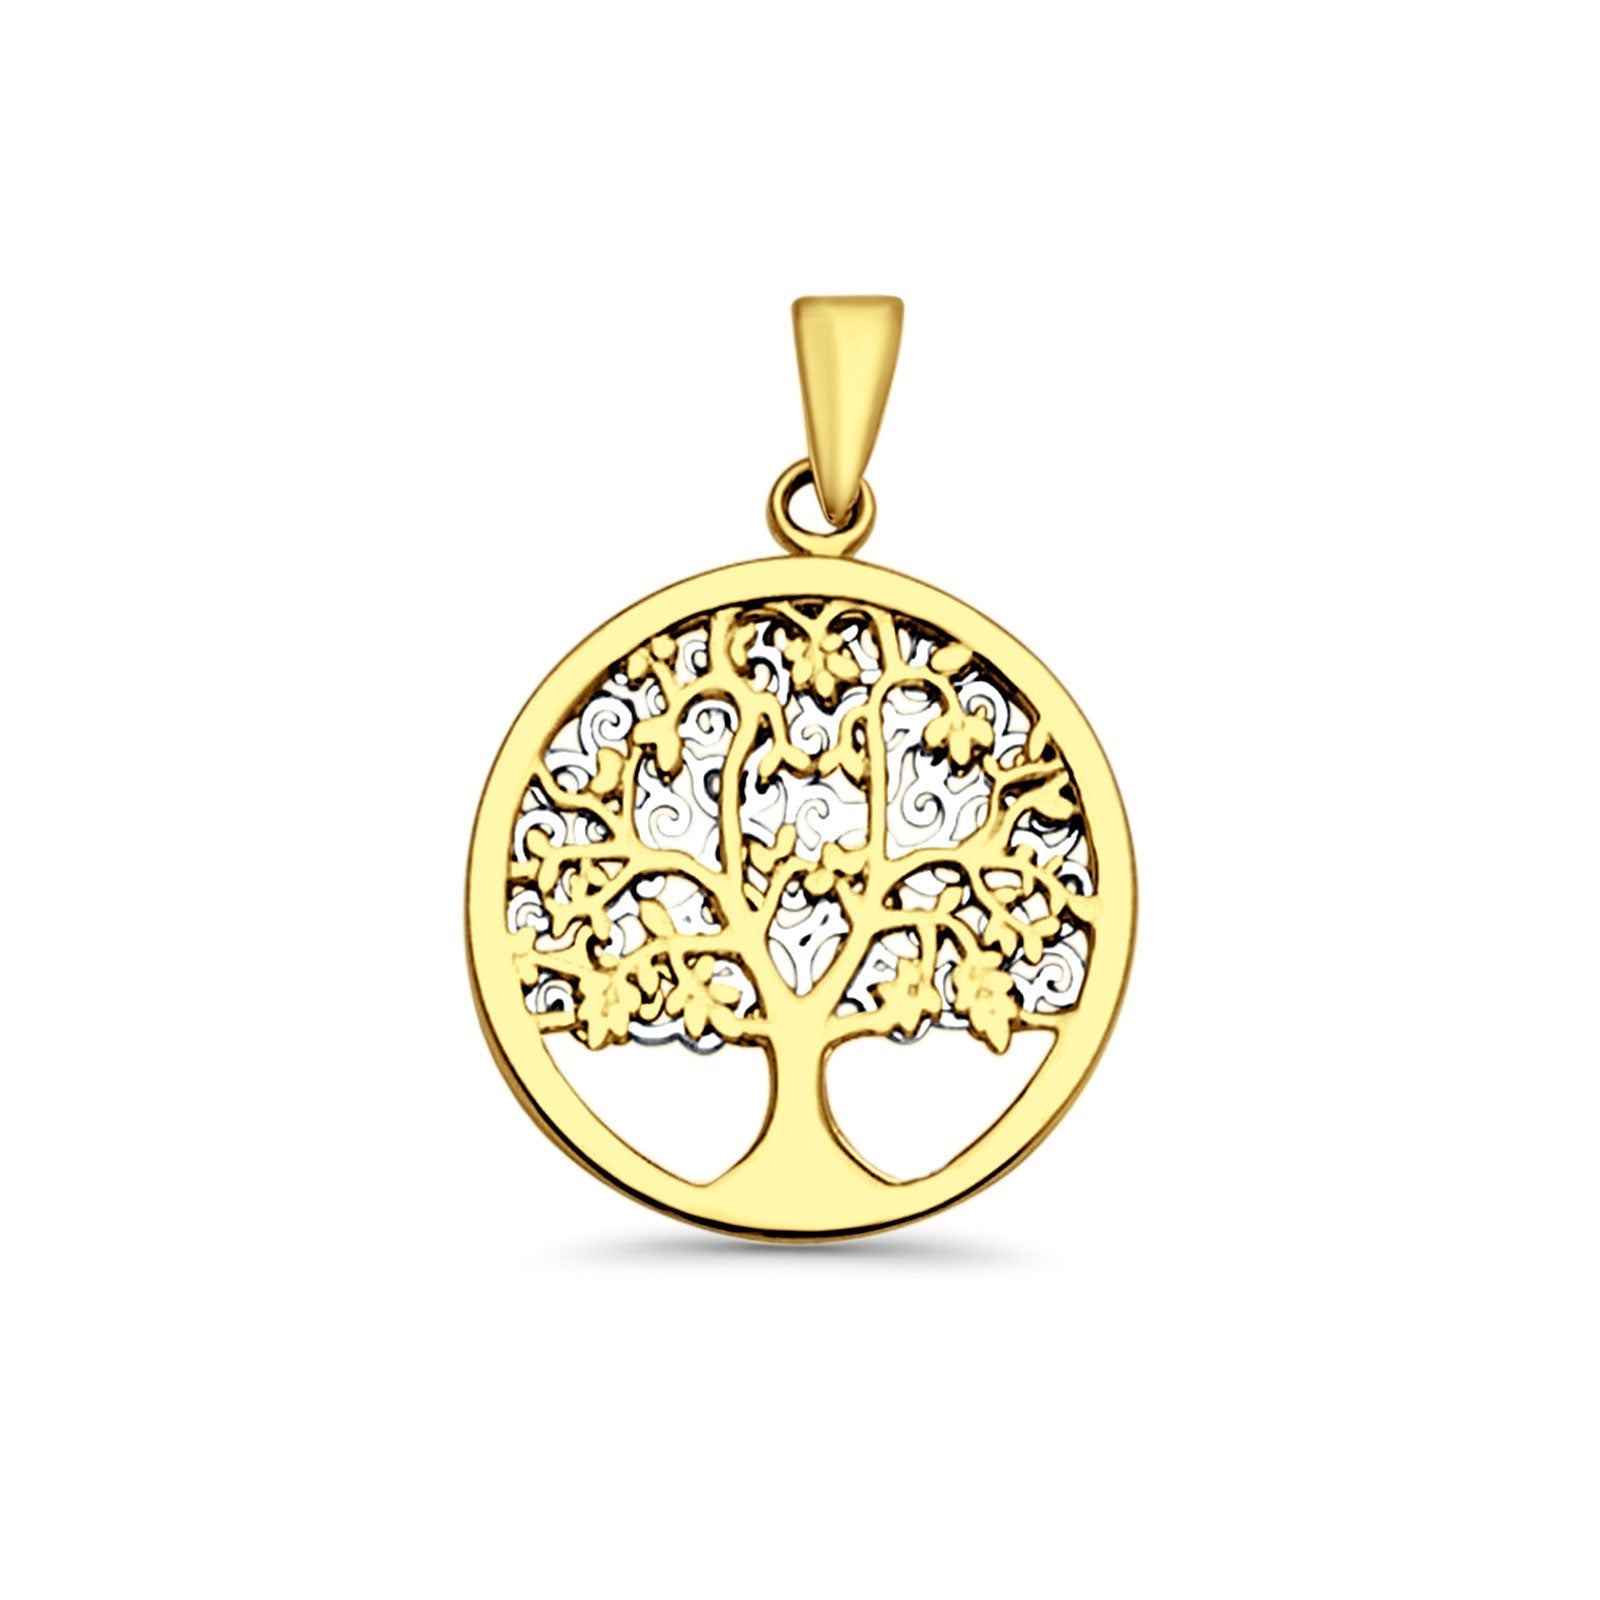 14K Two Color Gold Family Tree Pendant 25mmX17mm With 16 Inch To 24 Inch 0.6MM Width Box Chain Necklace